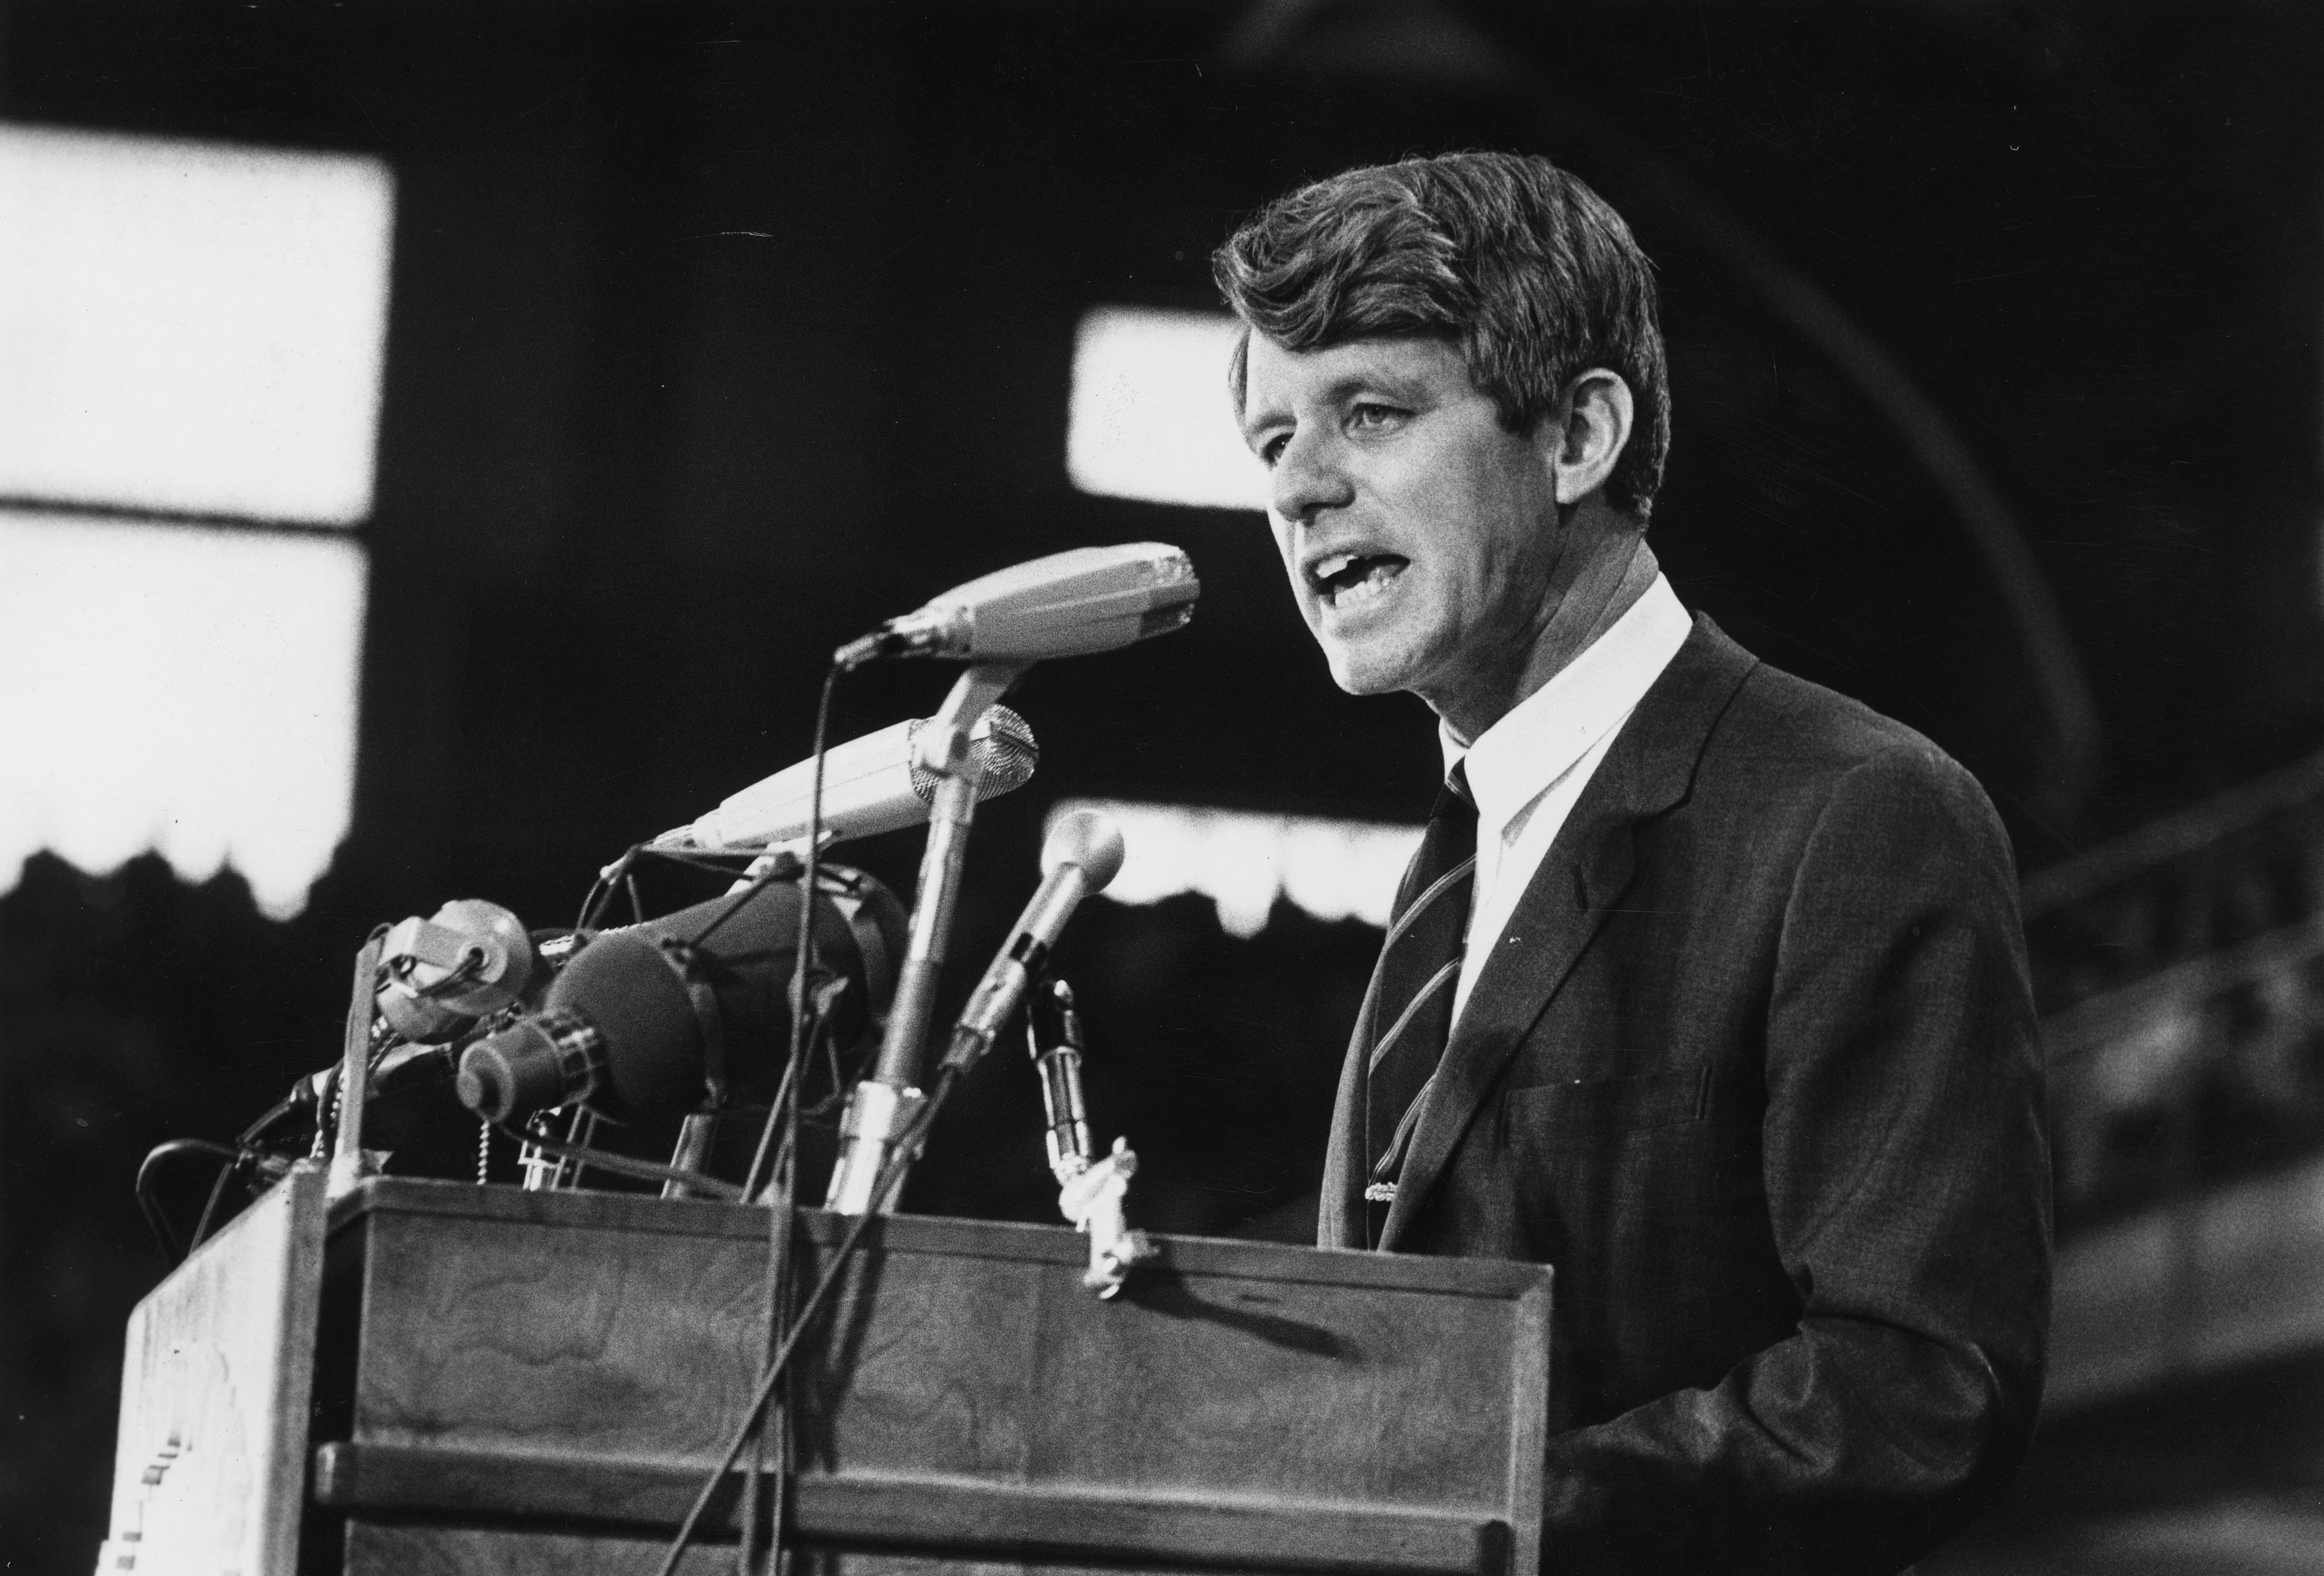 Robert Kennedy at an election rally